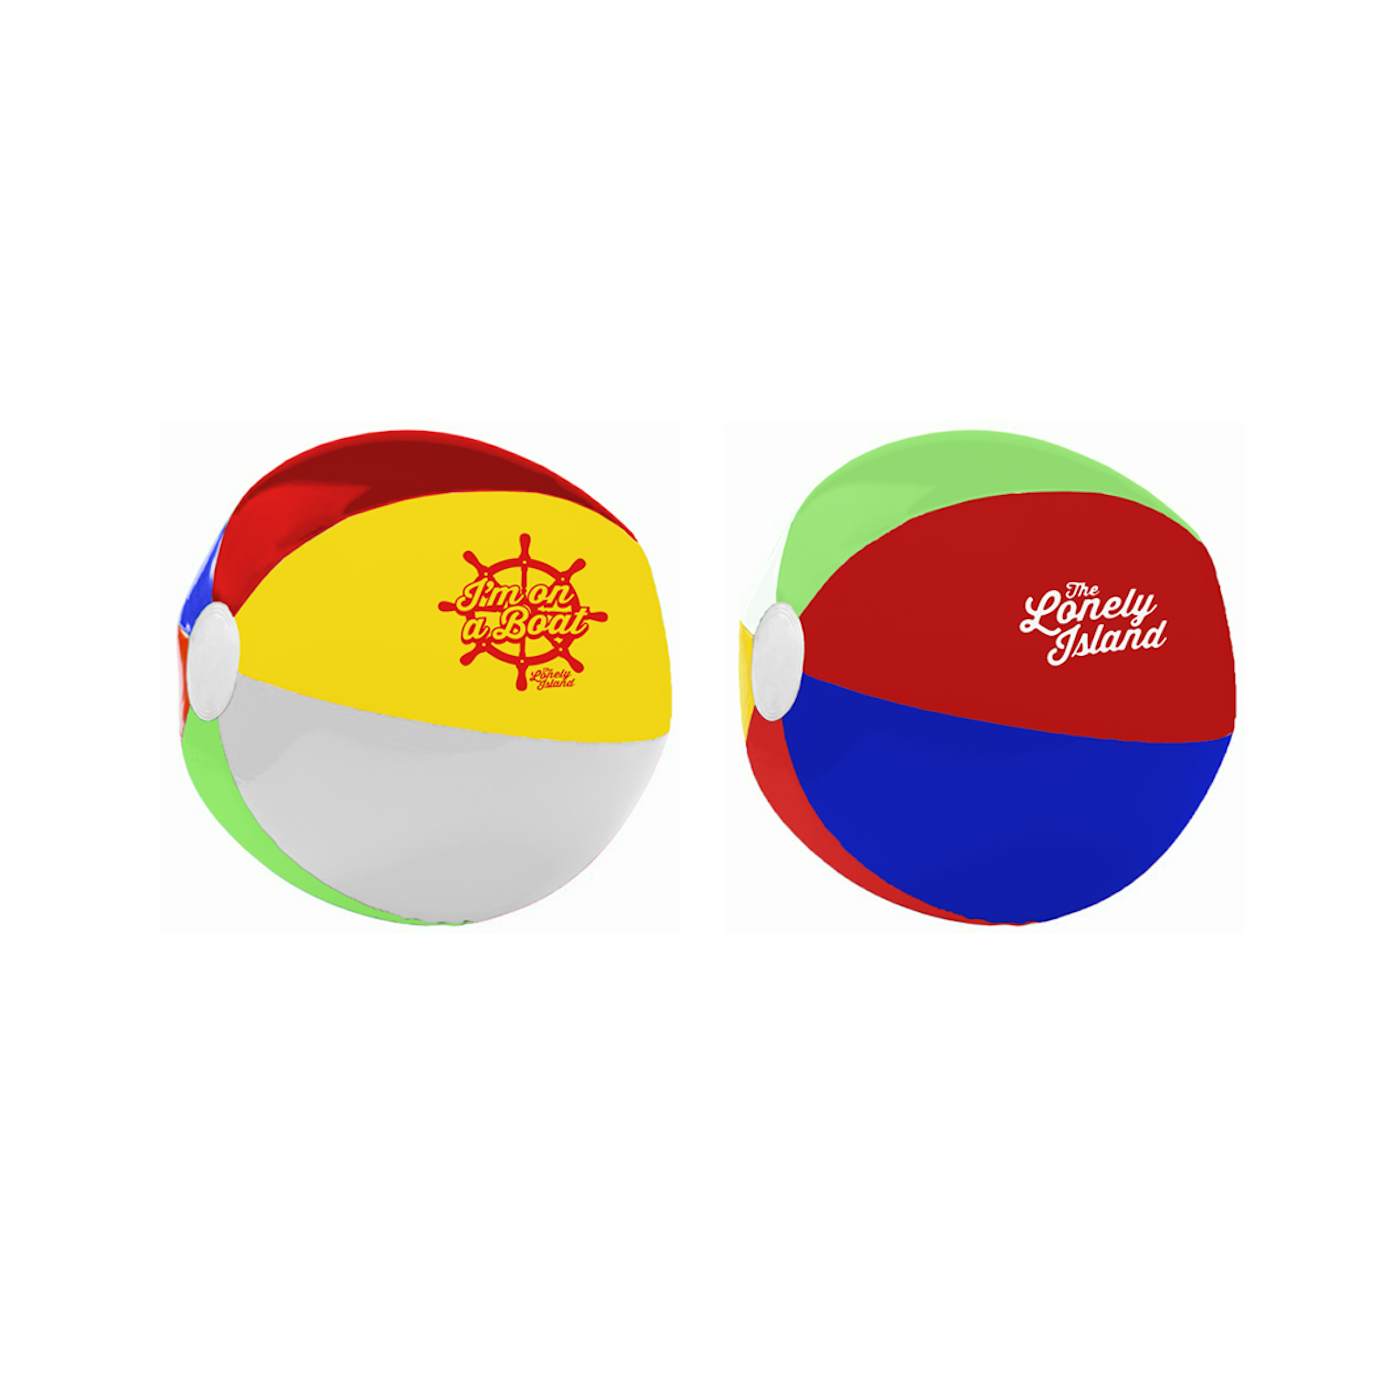 The Lonely Island Beach Ball